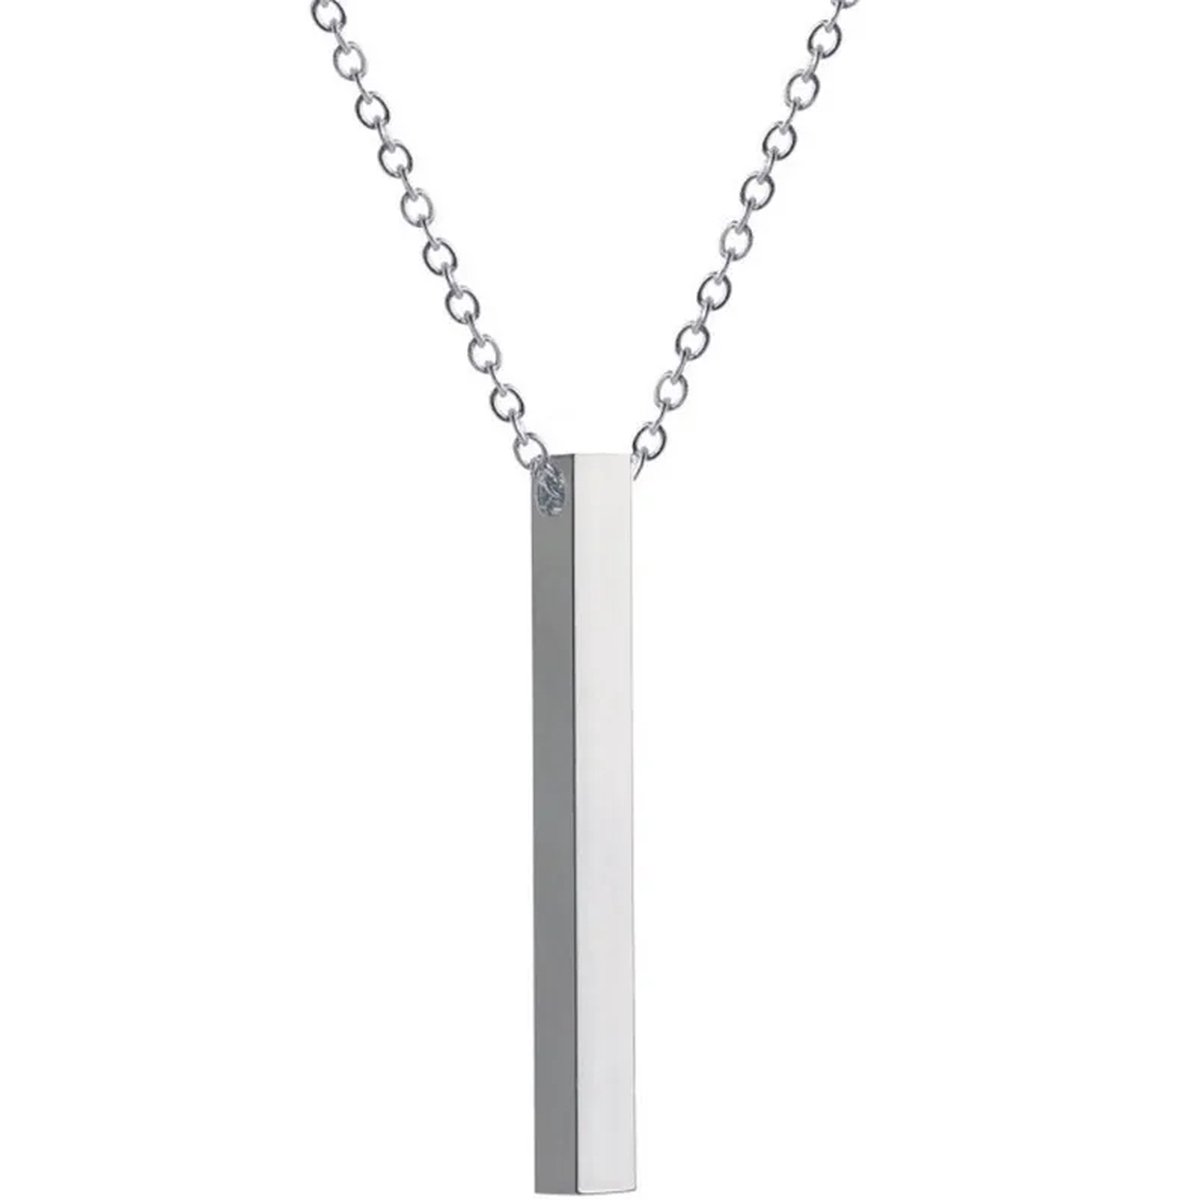 Plux Fashion The Rod Ketting - Zilver - 3mm/60cm - Sieraden - Zilveren Ketting - The Rod Chain - Stainless Steel - Ketting - HipHop Ketting - Schakel Ketting - Sieraden Cadeau - Luxe Style - Duurzame Kwaliteit - Moederdag Cadeau - Vaderdag Cadeau